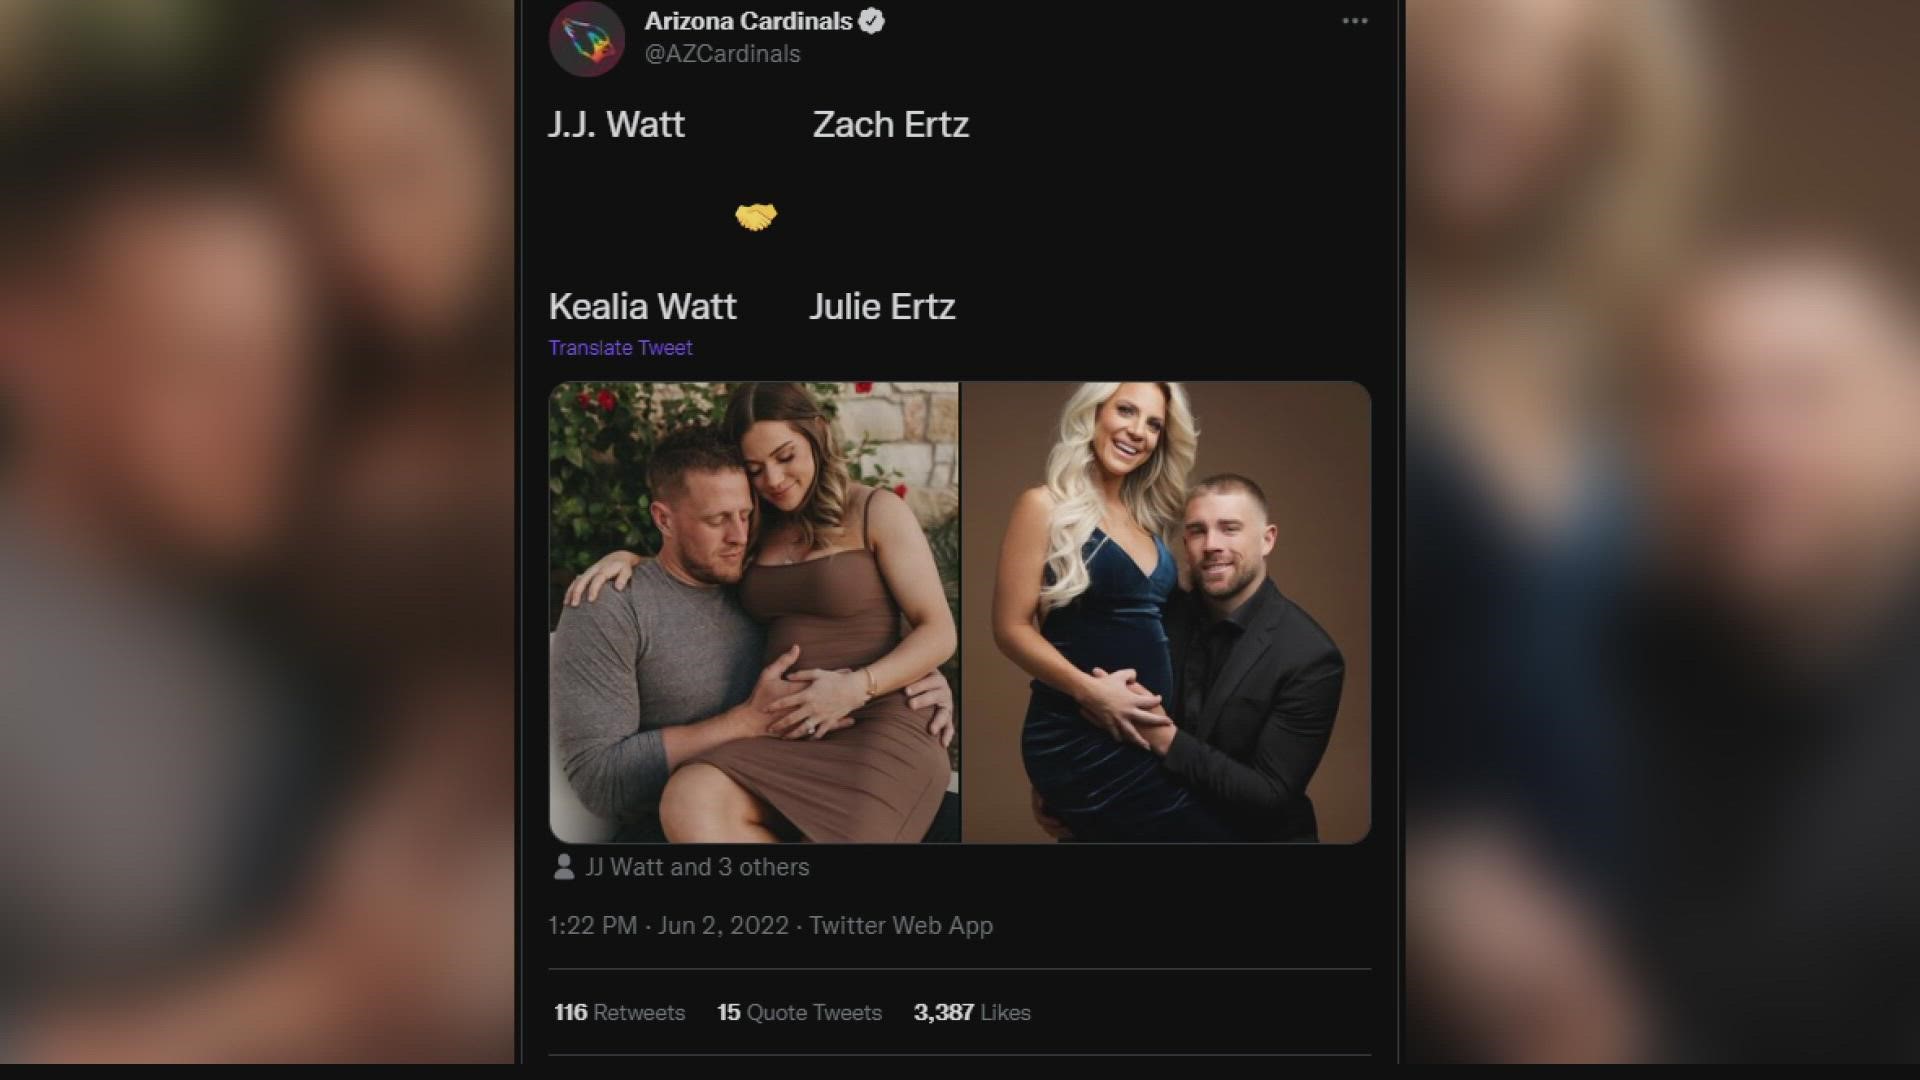 Cardinals defensive end JJ Watt and his wife Kealia Ohai Watt took to Twitter to share the pregnancy news and show off photos to celebrate the announcement.